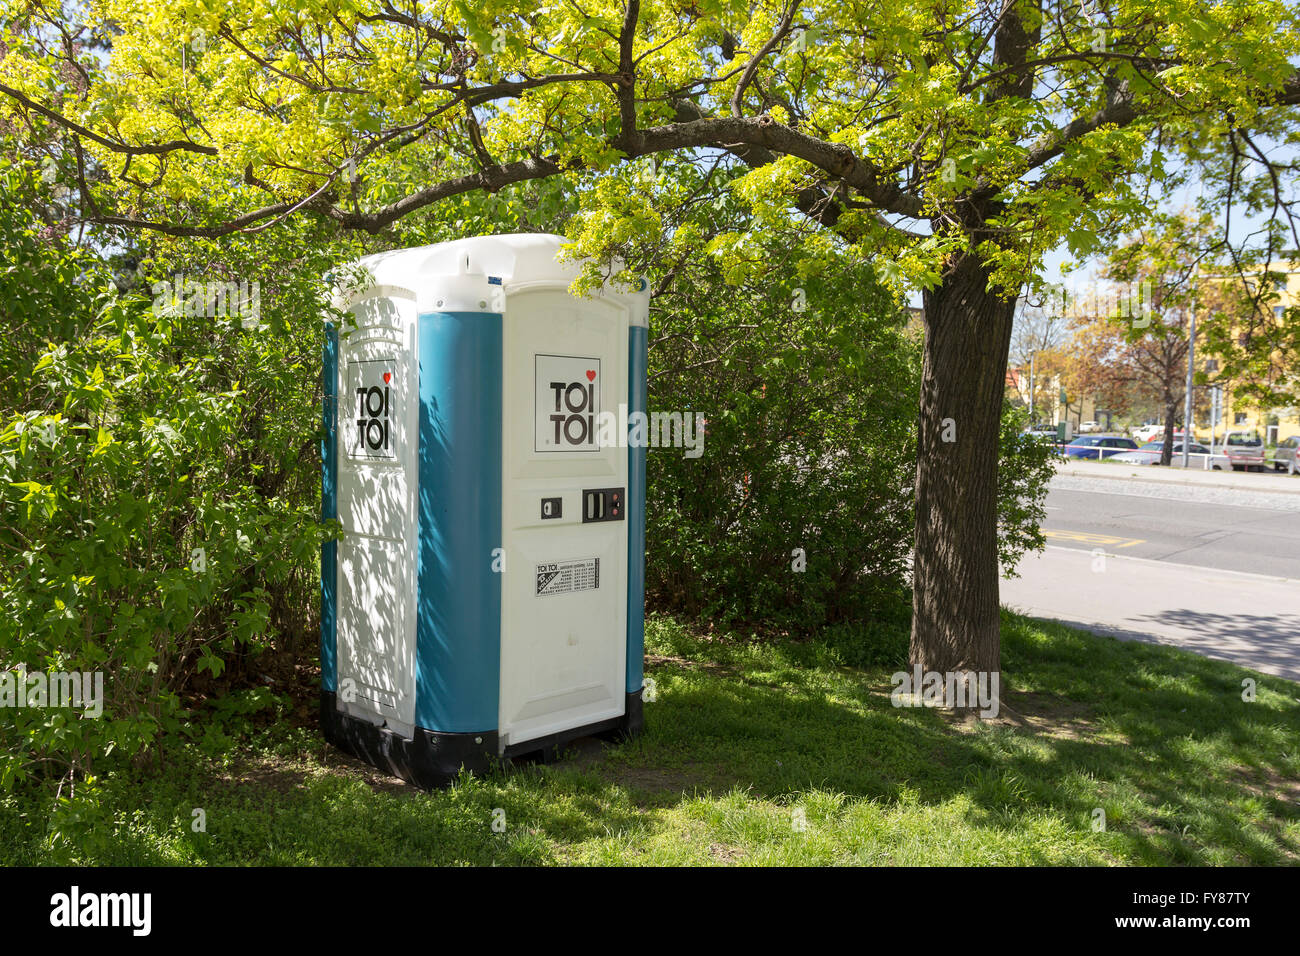 Portable Toi Toi toilet stands under a tree in a park Stock Photo